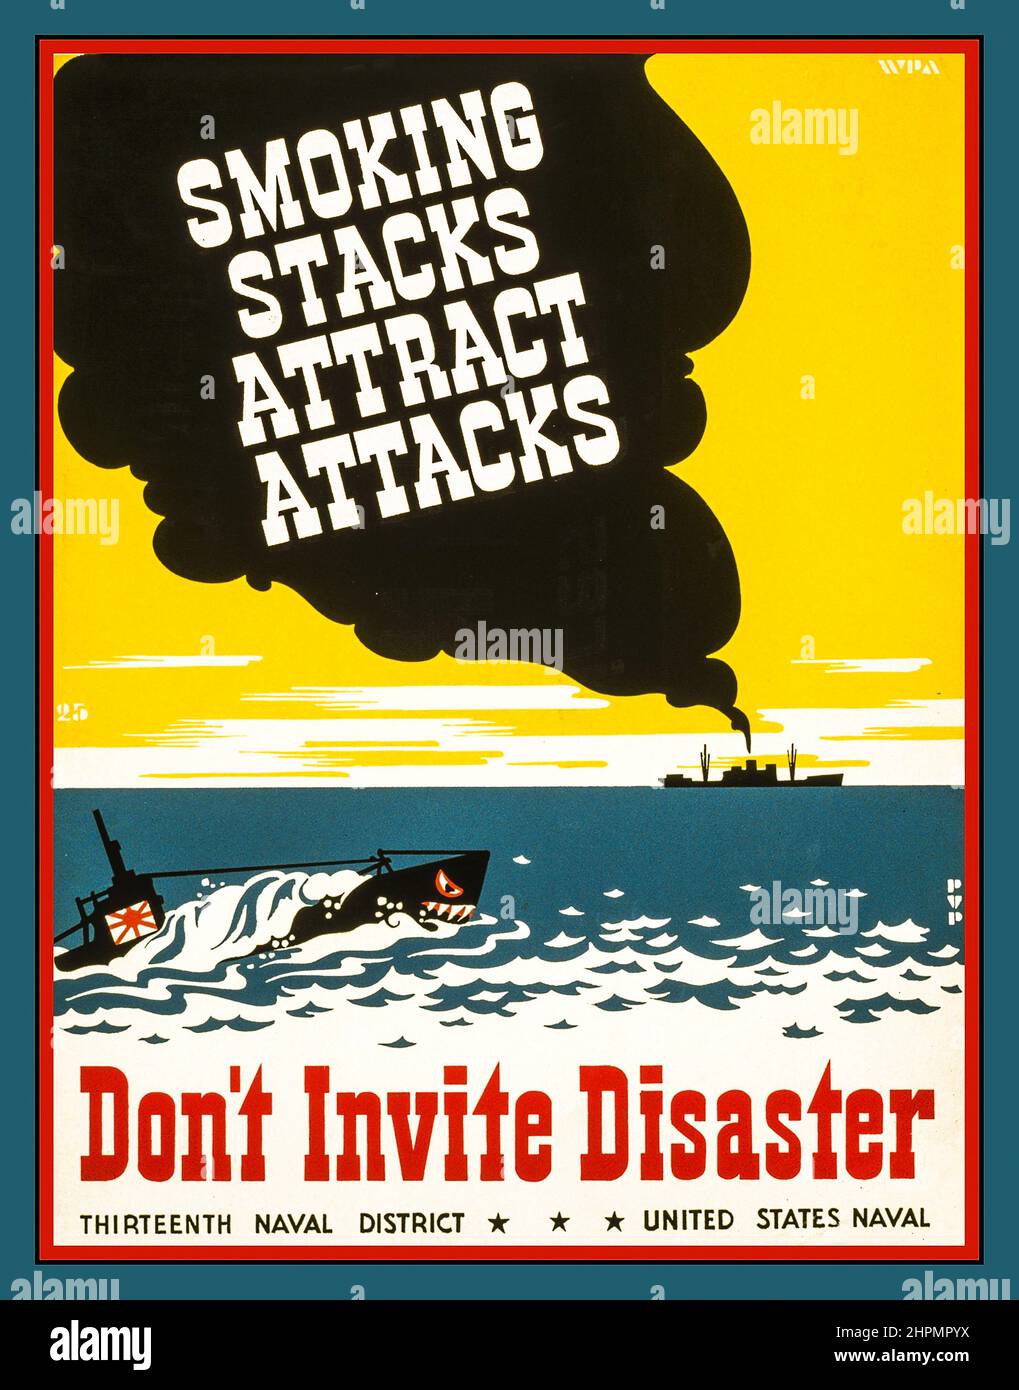 America Propaganda WW2 Poster 'Smoking stacks attract attacks'. WW2 Advisory shipping poster 'Dont Invite Disaster' Poster for Thirteenth Naval District, United States Navy, showing smoke coming from smokestack of ship, Japanese submarine with rising sun on prow in foreground.World War II Second World War Stock Photo